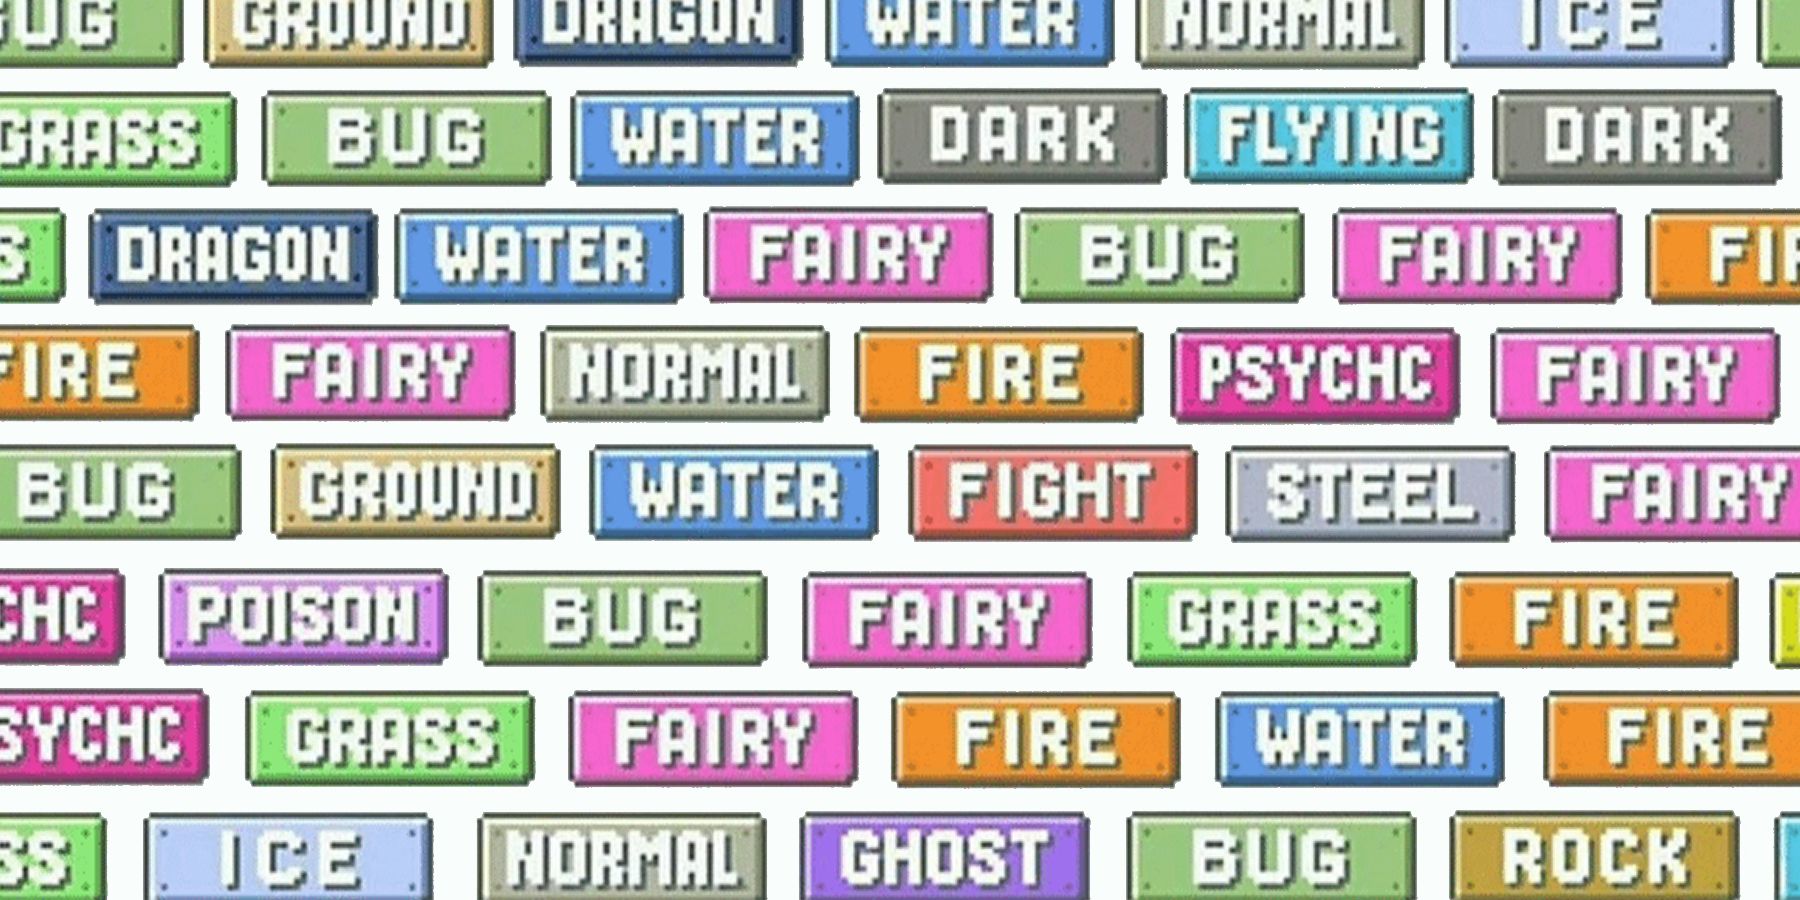 The Best Pokemon type combinations according to game theory